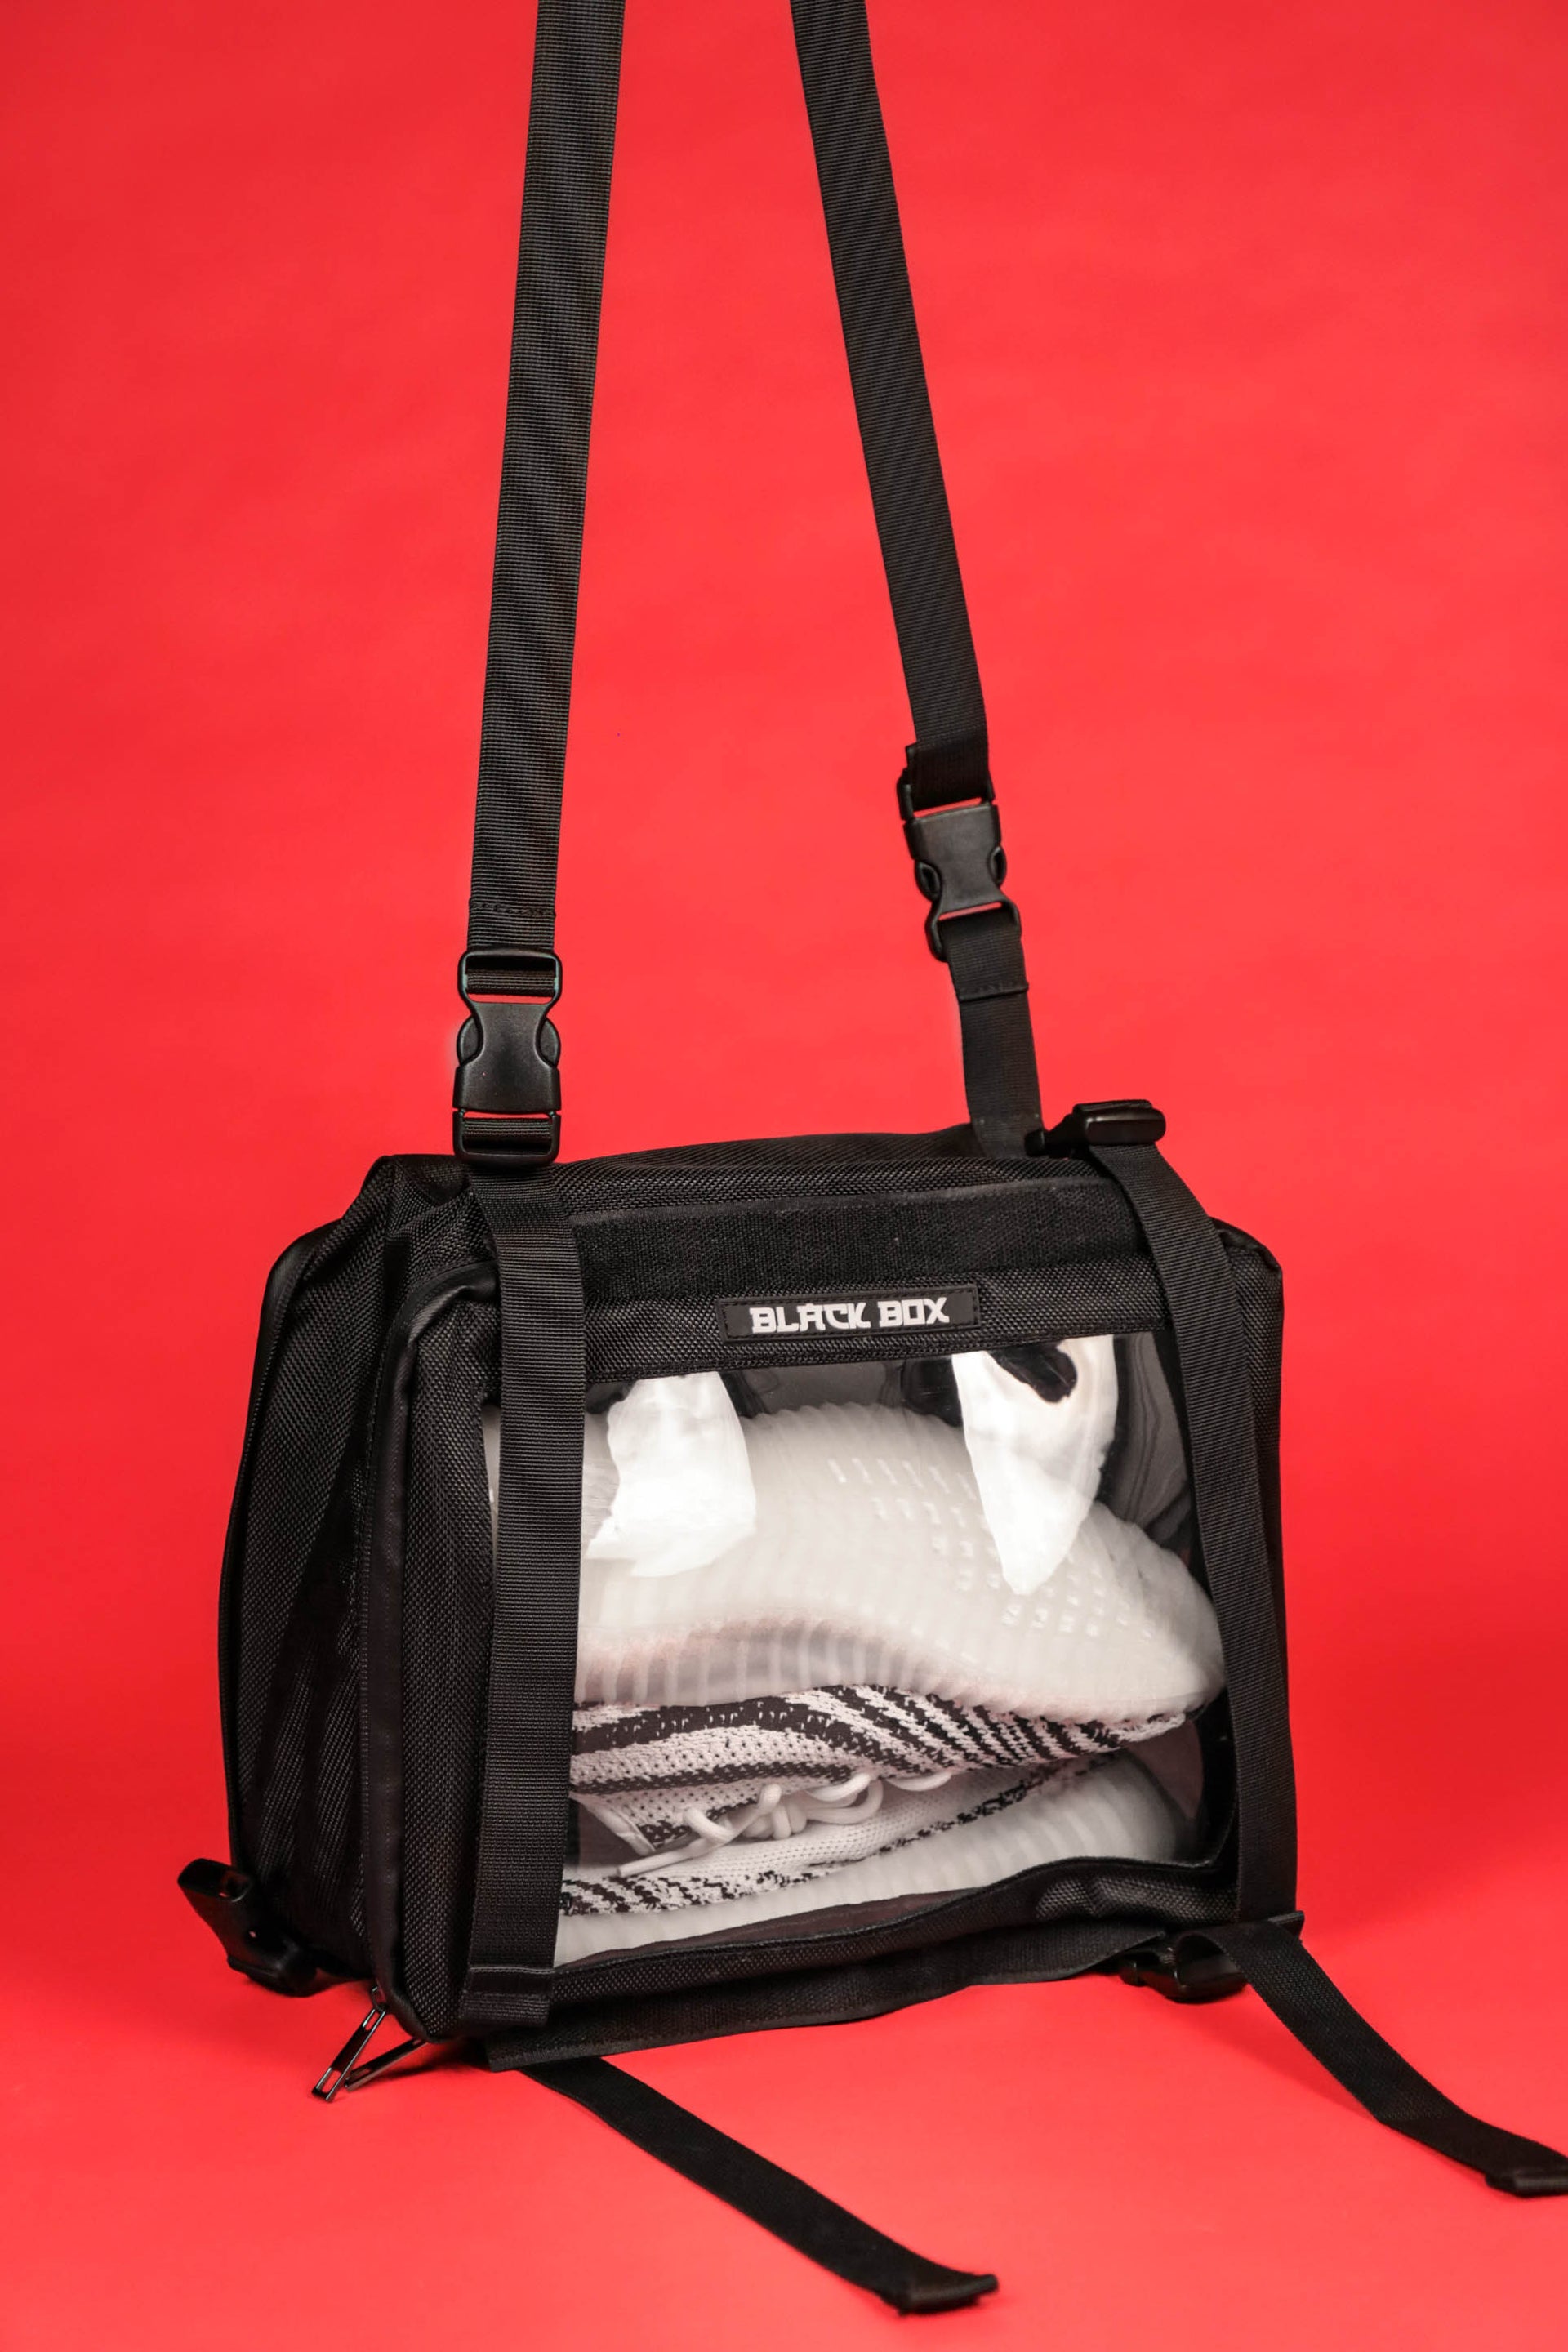 The shoulder strap on the Black Box Portable Hanging Sneaker Bag For Travel and Storage With Clear Window